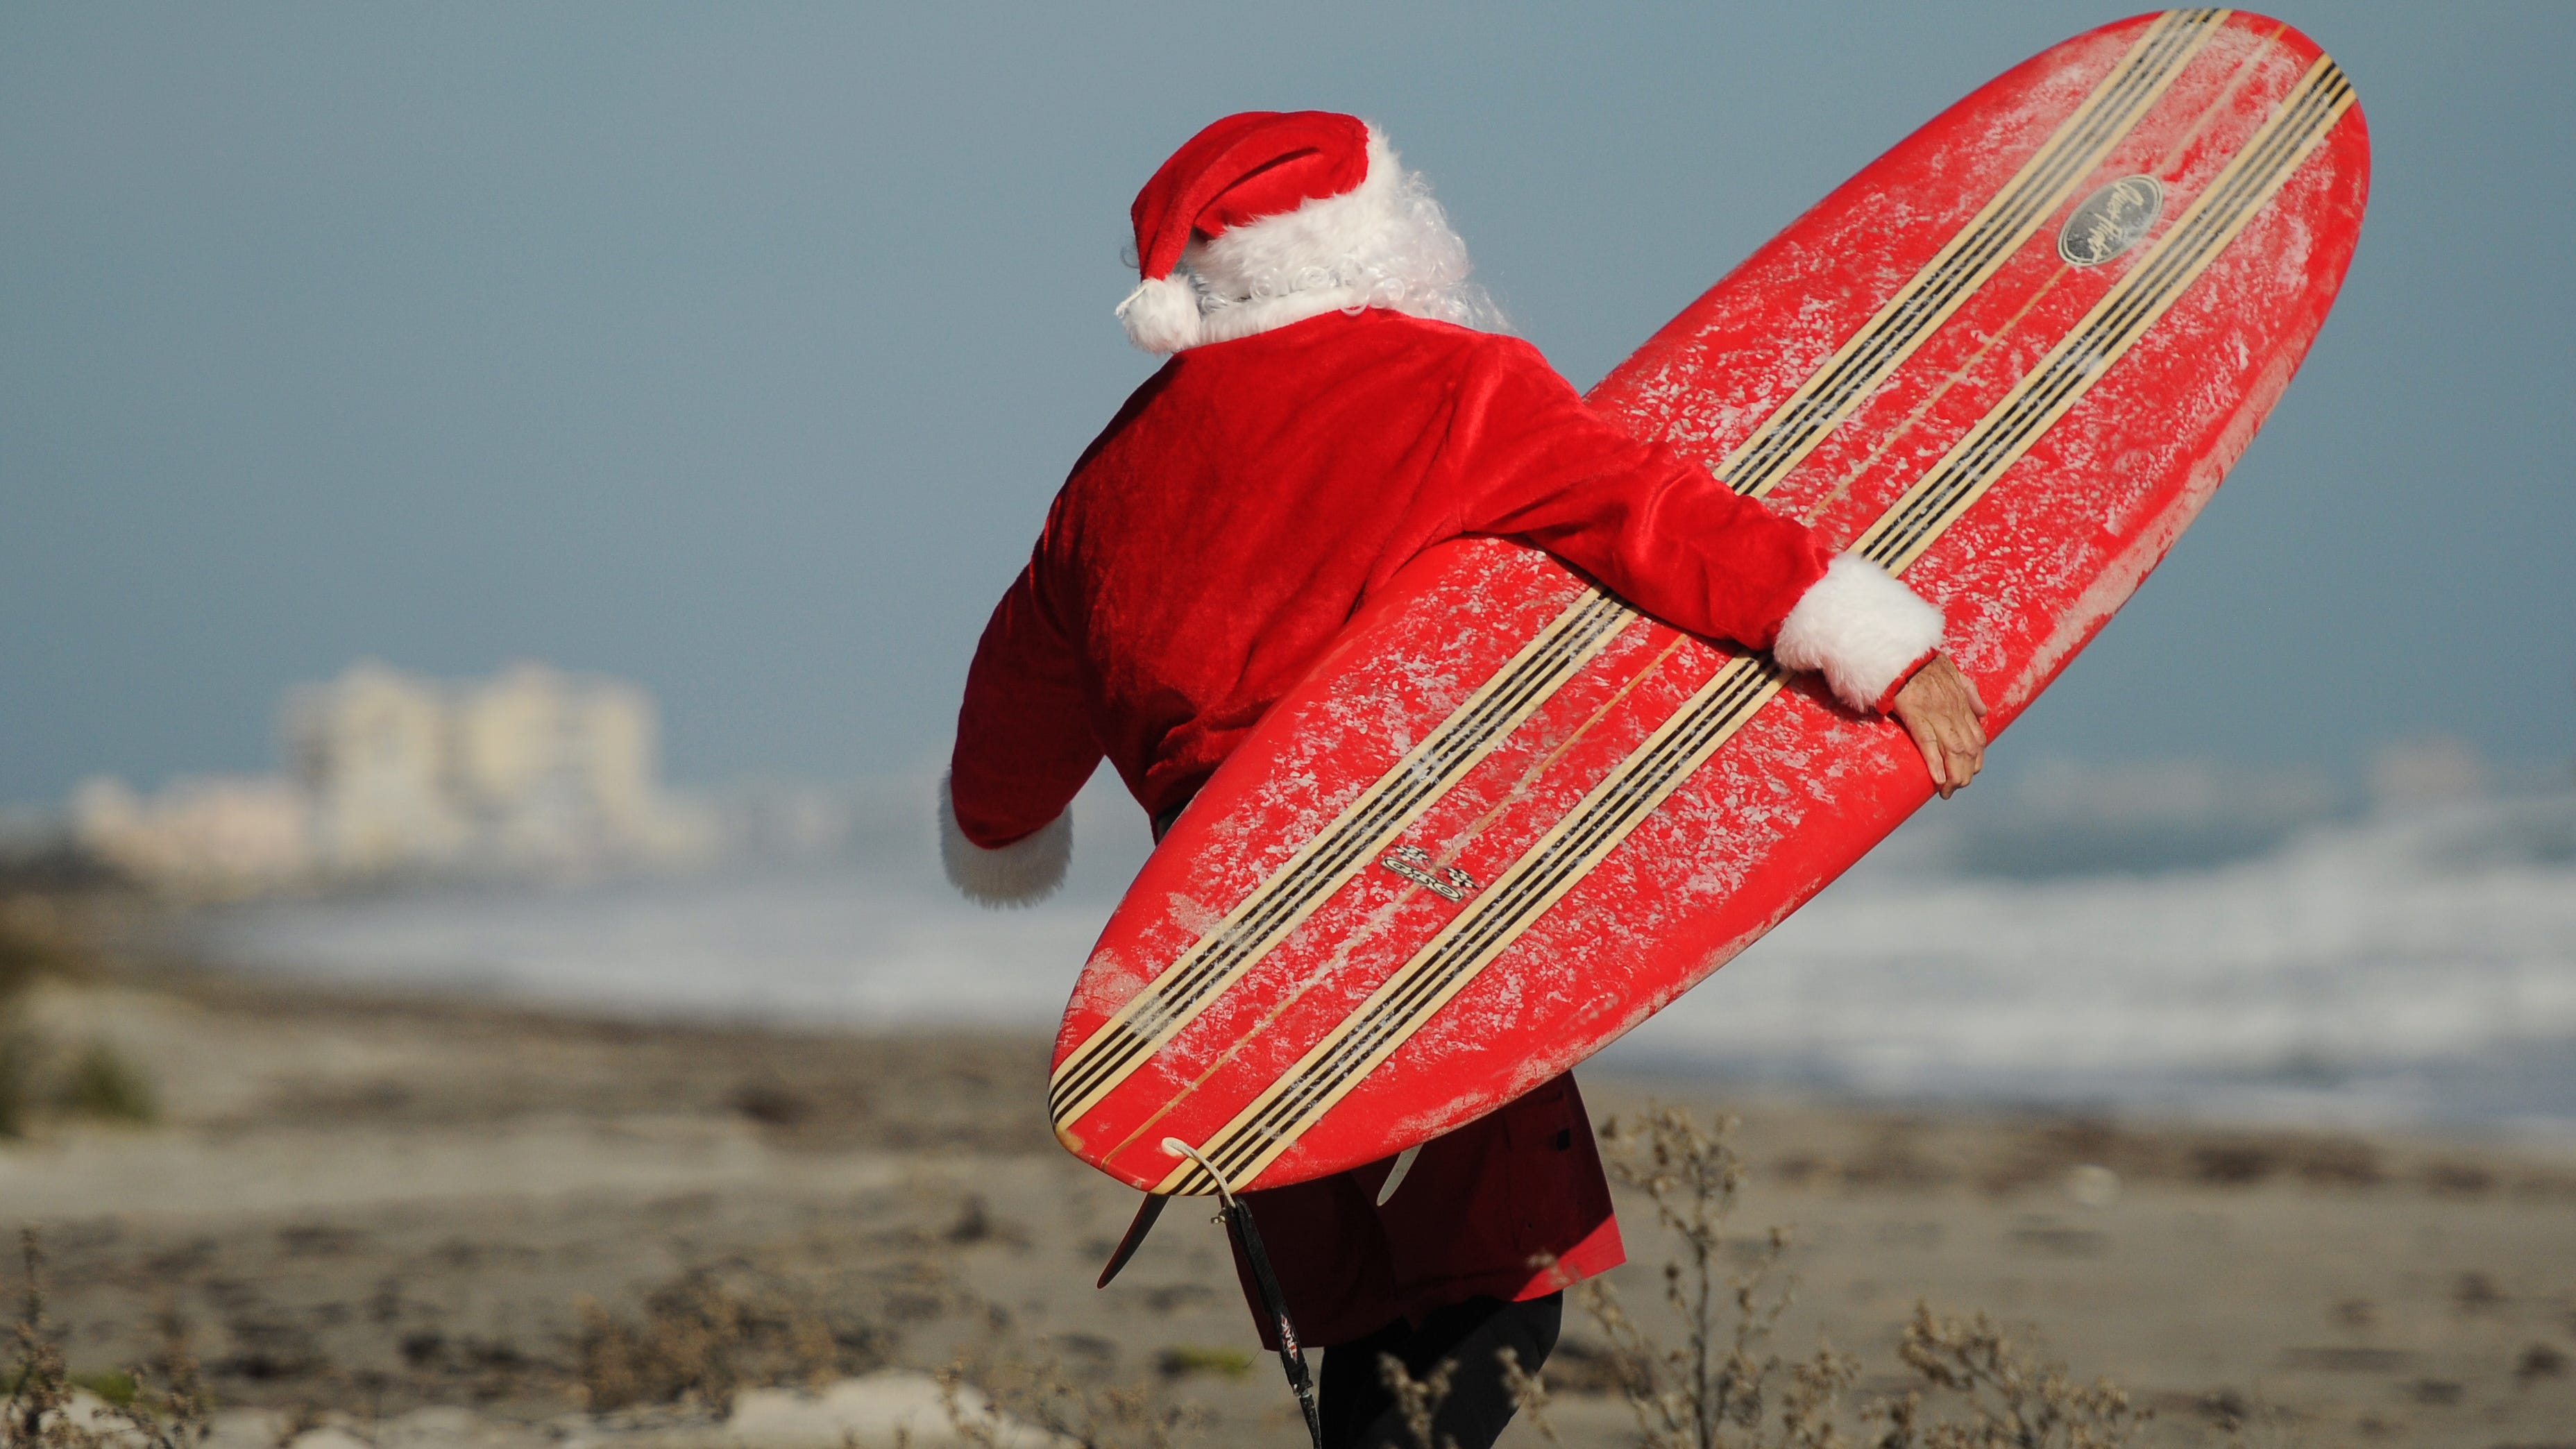 The Surfing Santas event takes place at the Cocoa 